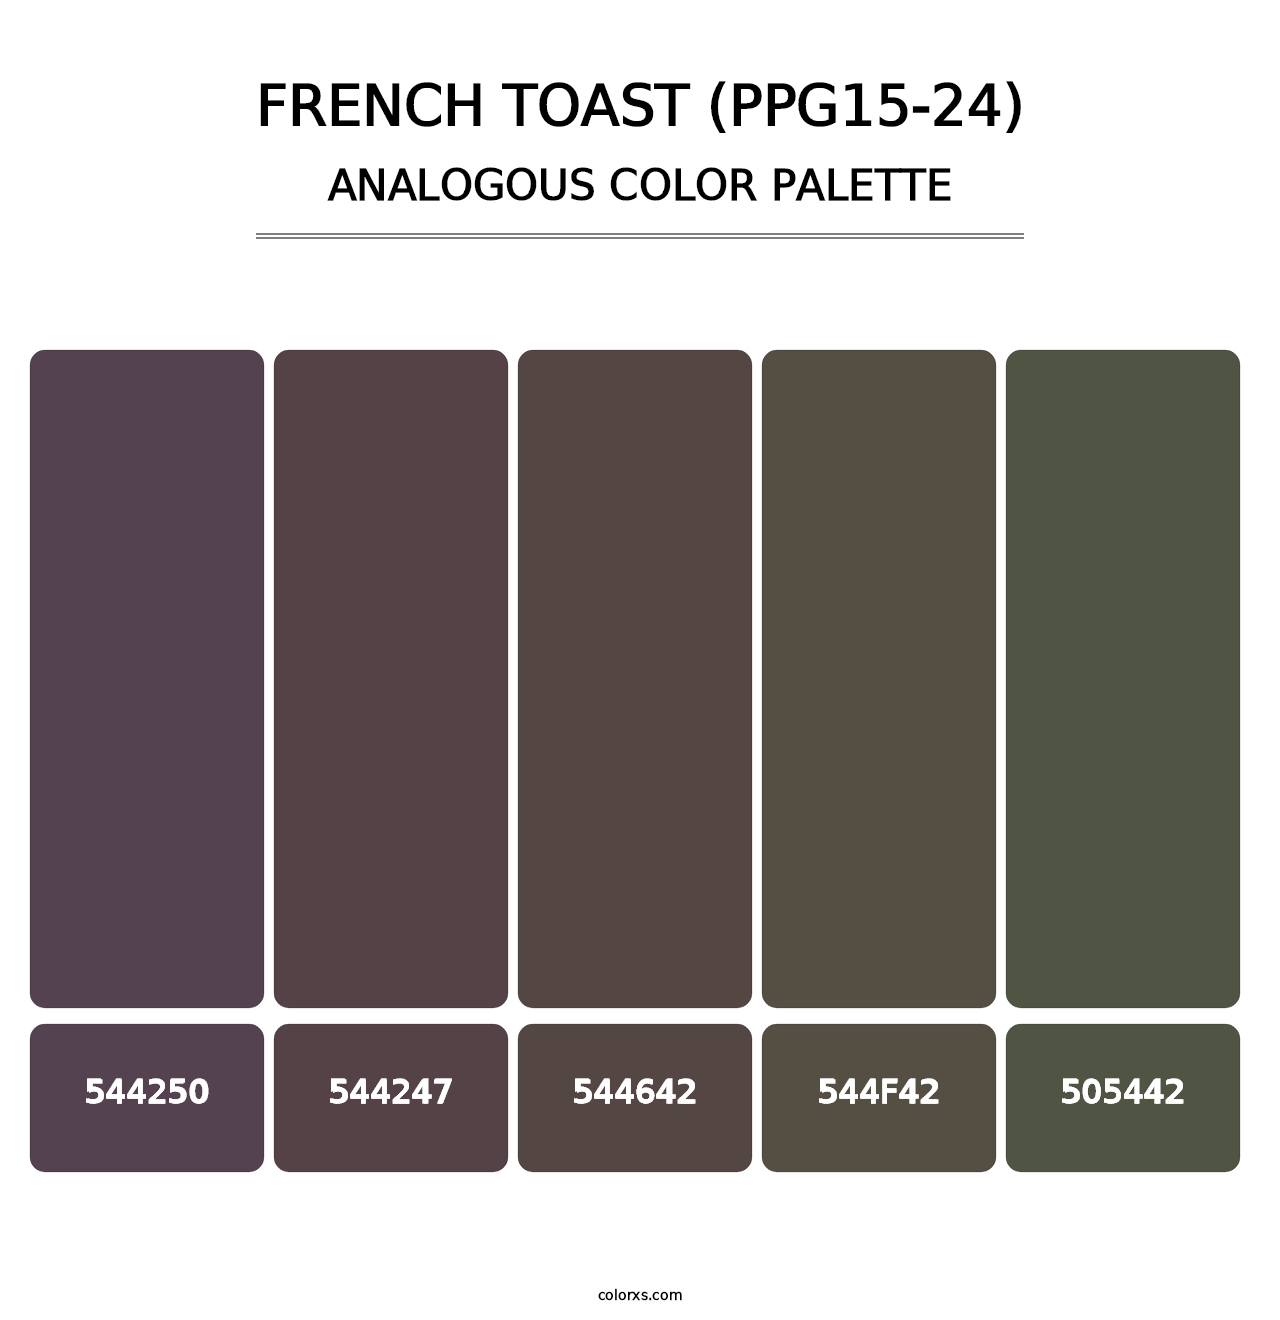 French Toast (PPG15-24) - Analogous Color Palette